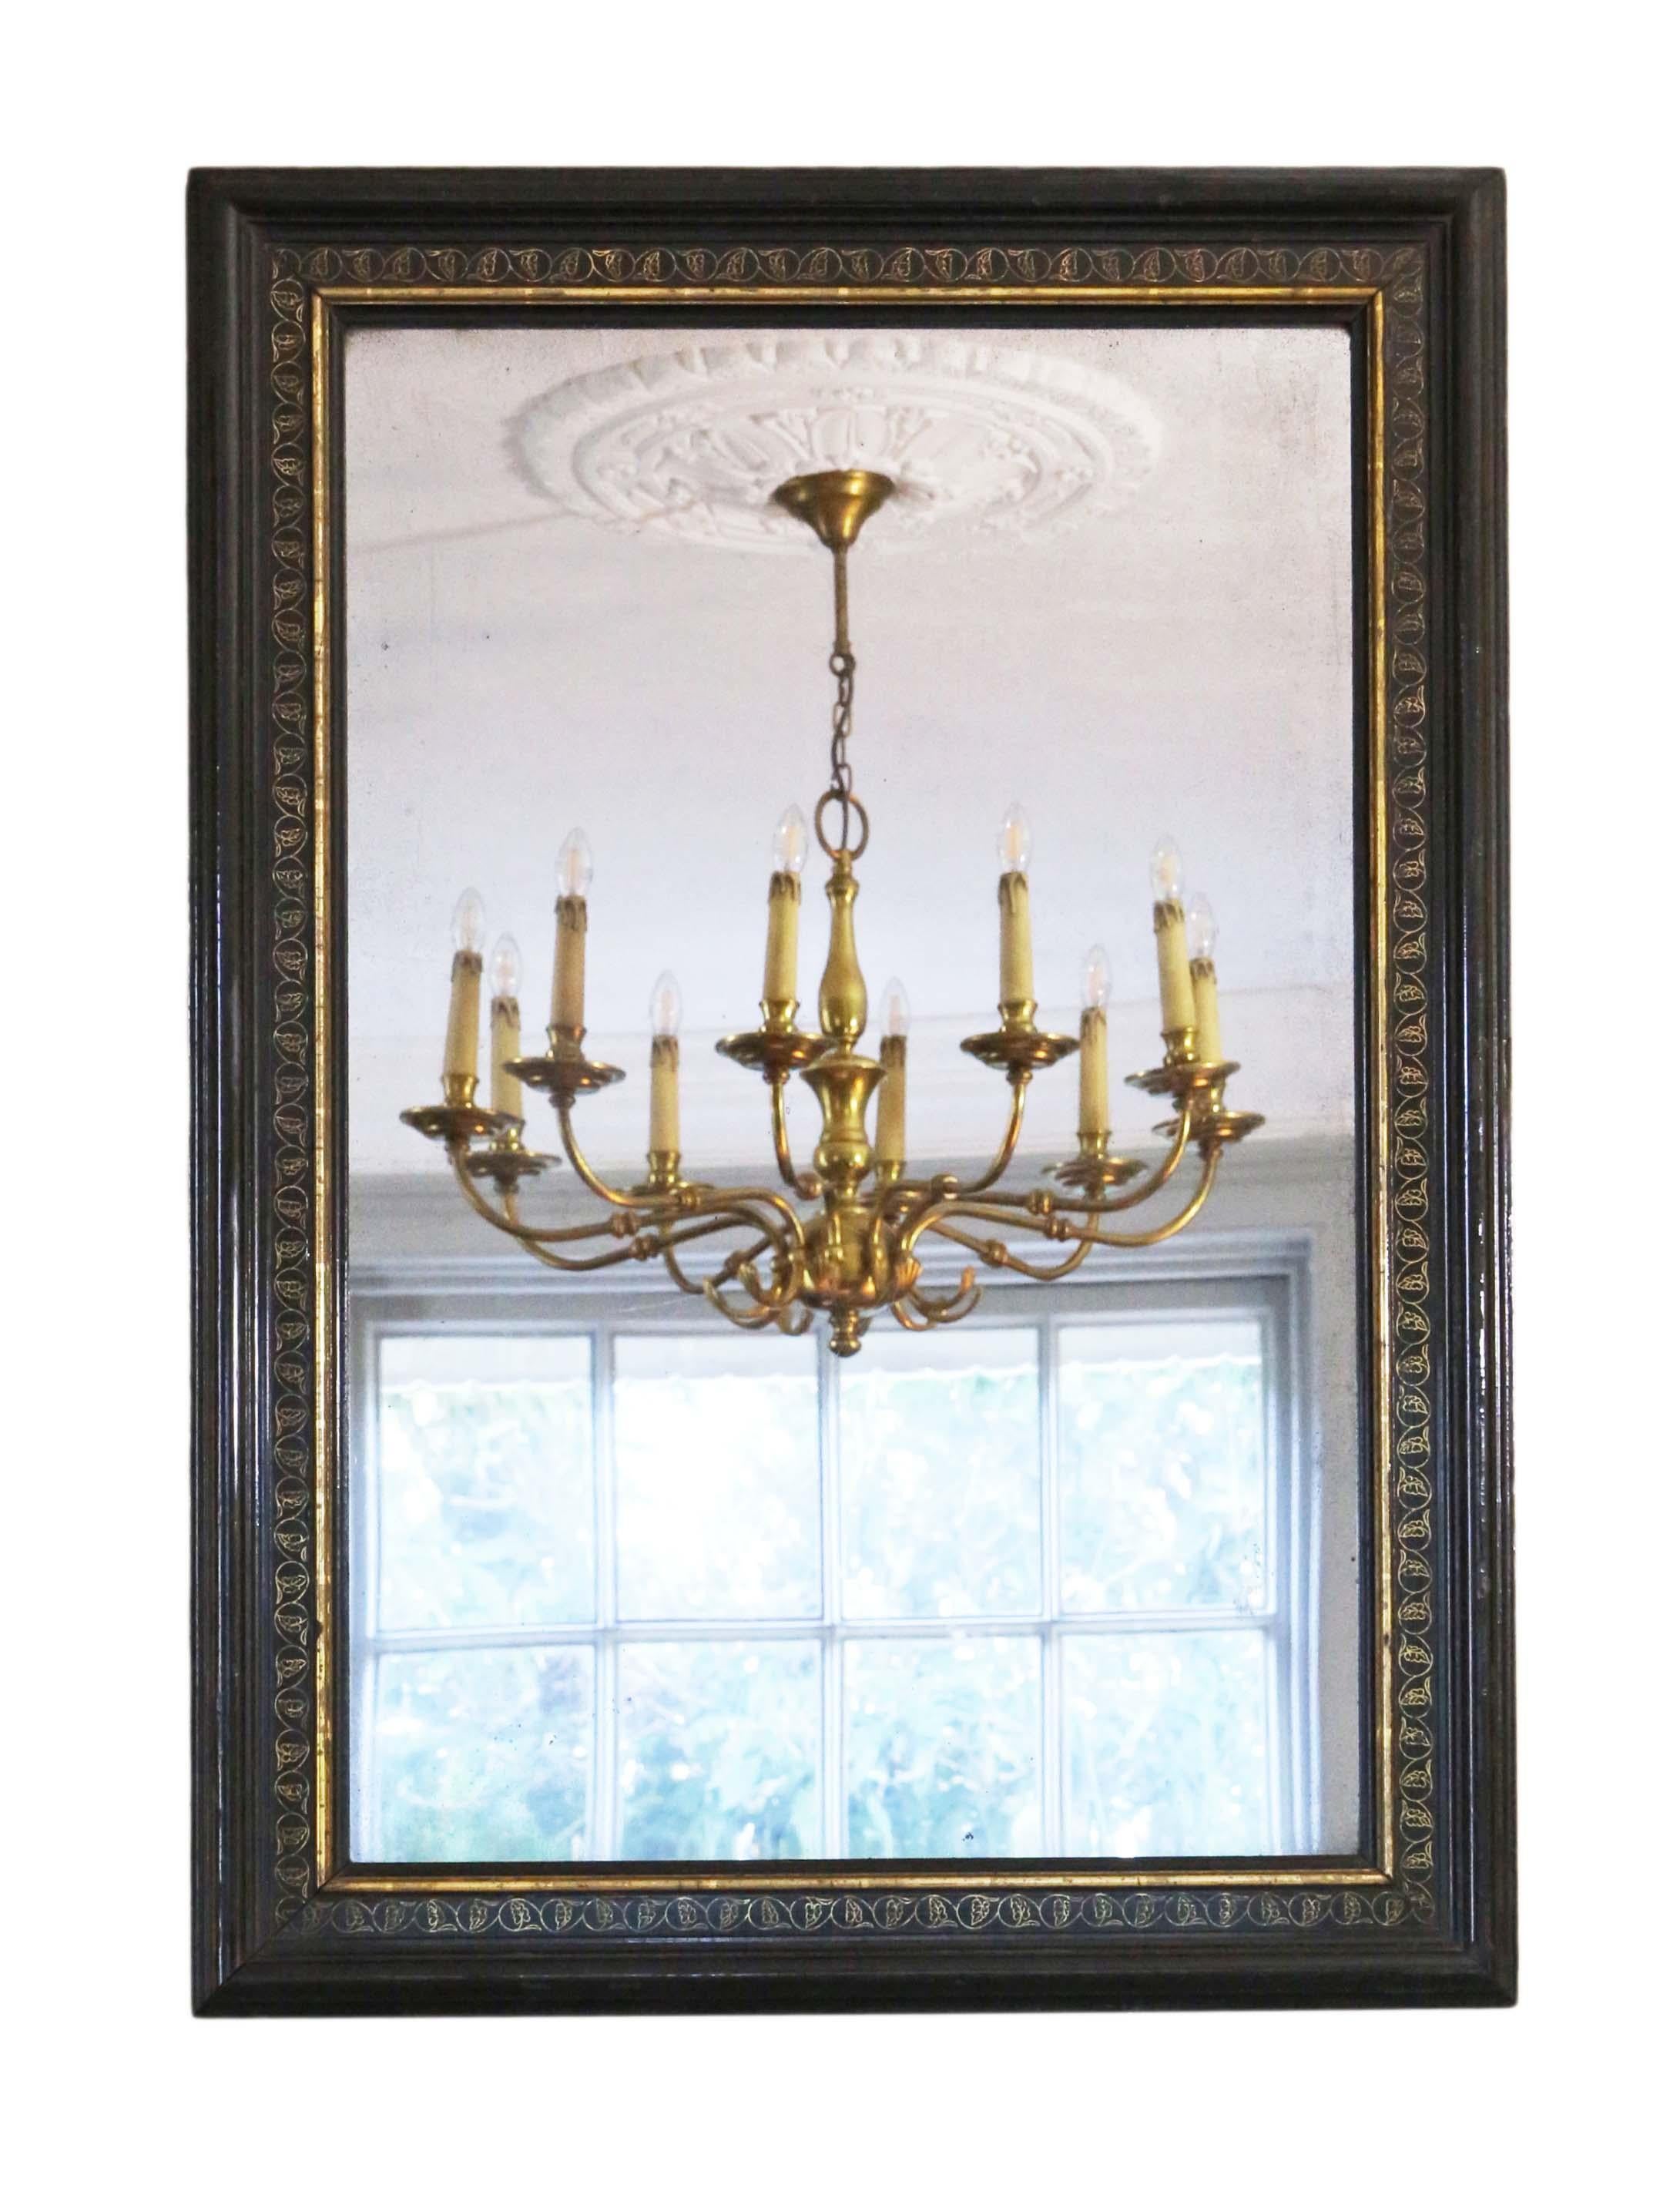 Antique 19th Century large quality ebonised and gilt wall mirror or overmantle.

An impressive rare find, that would look amazing in the right location. No loose joints or woodworm.

The original mirrored glass has light/medium oxidation and age